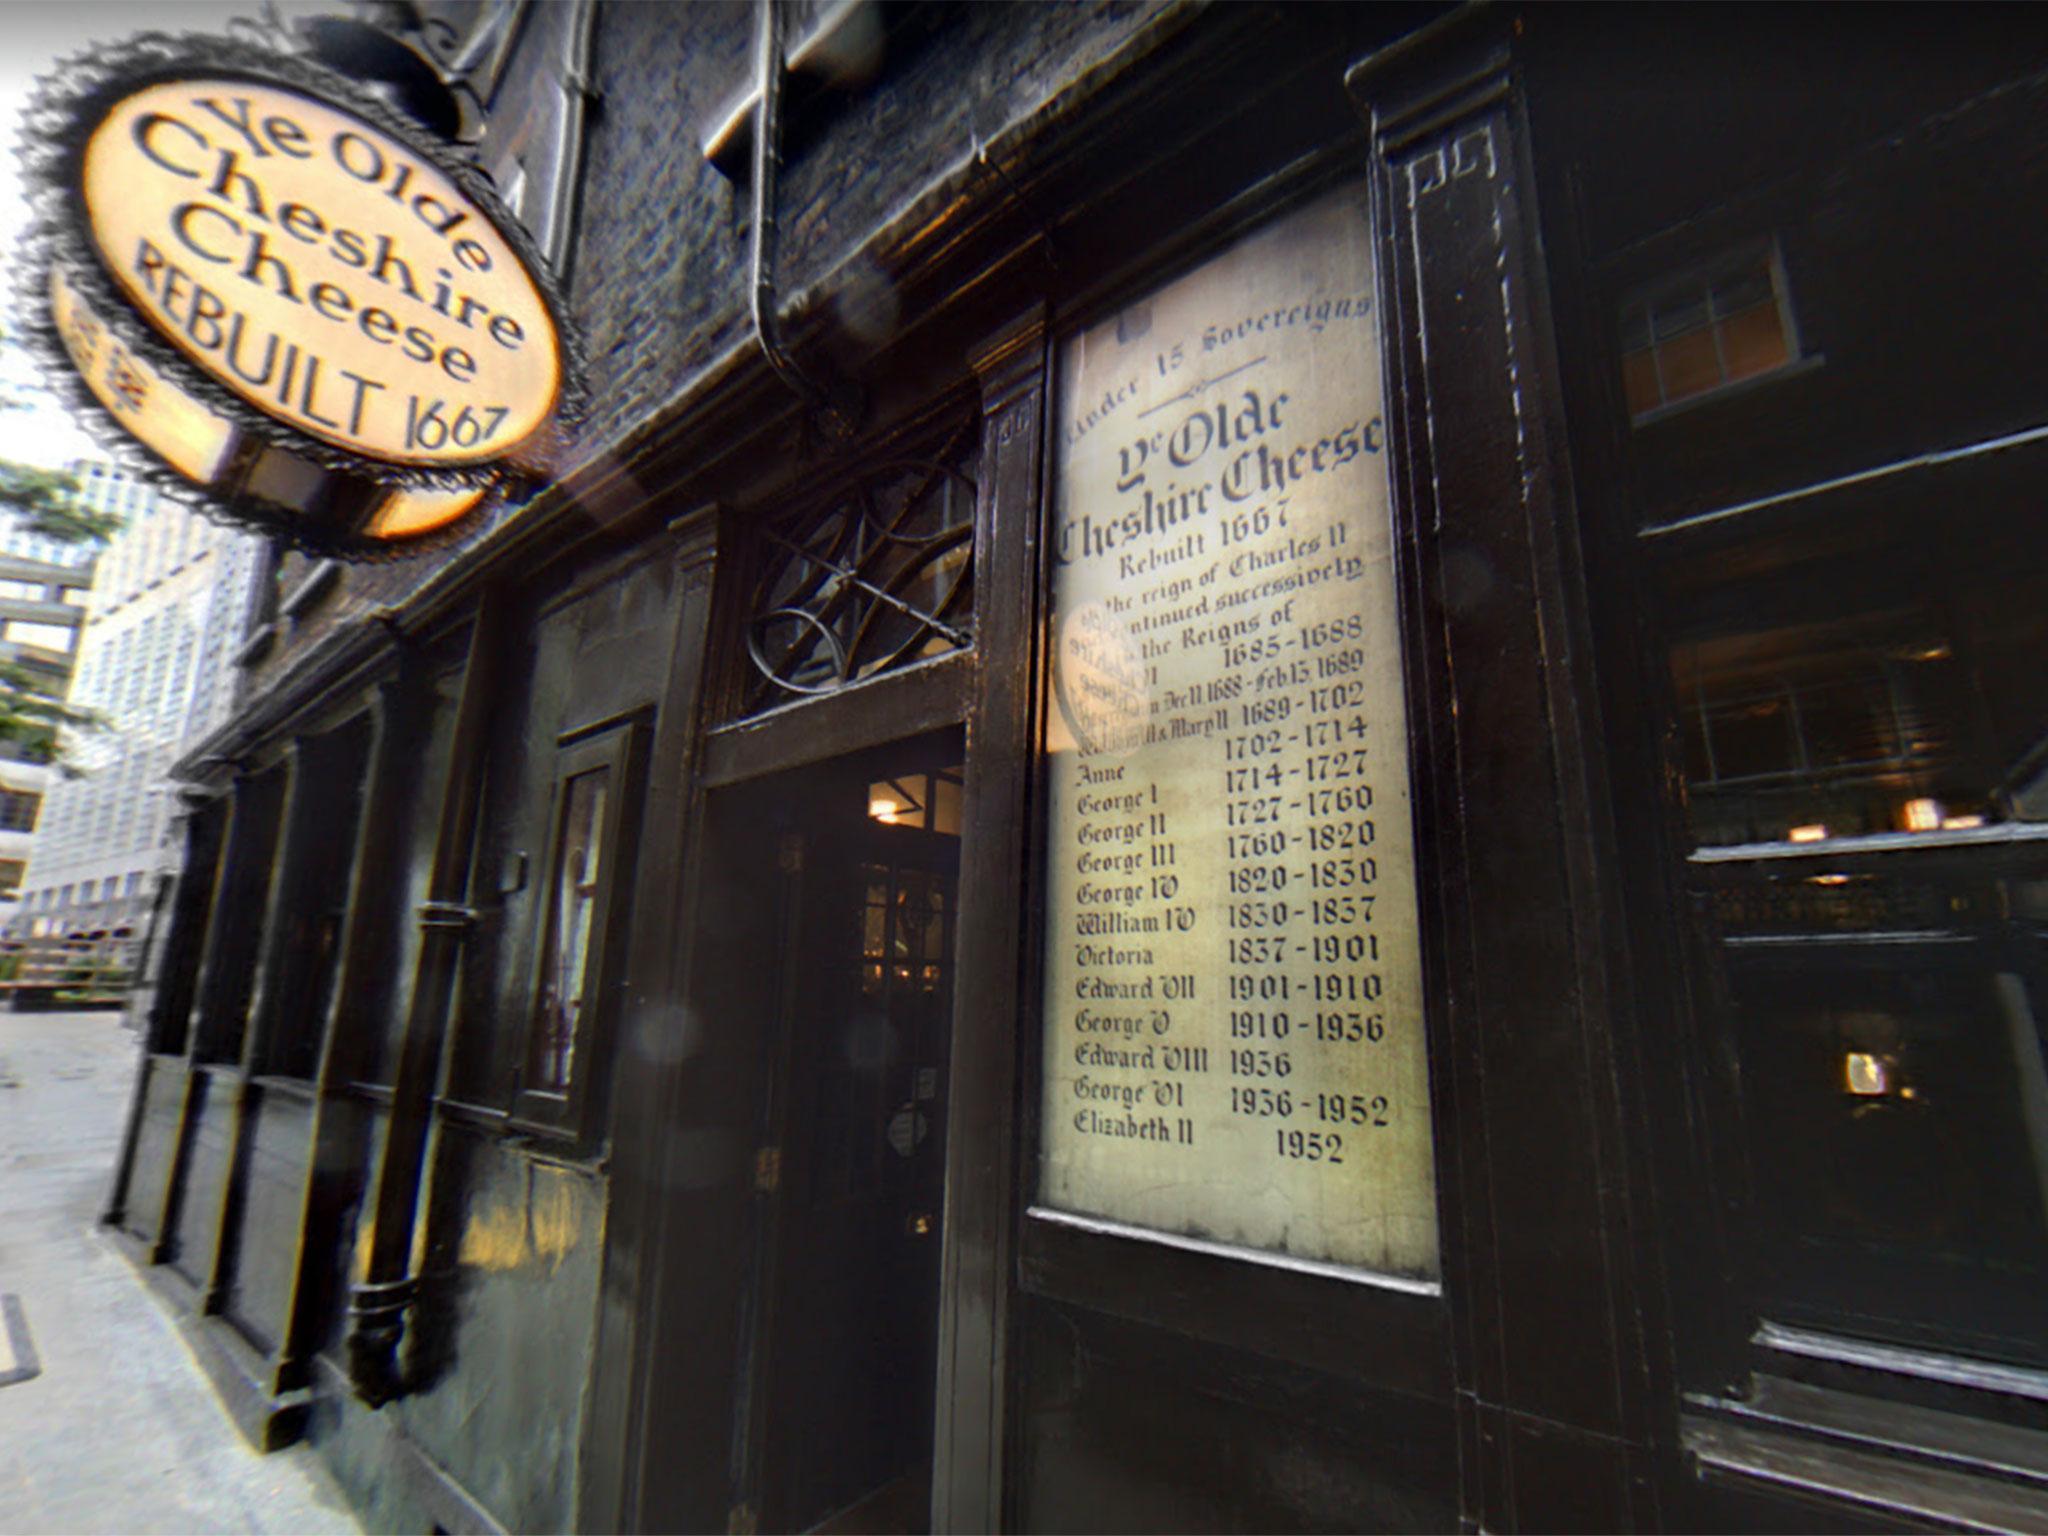 Ye Olde Cheshire Cheese in London once boasted Samuel Johnson and Arthur Conan Doyle as regulars